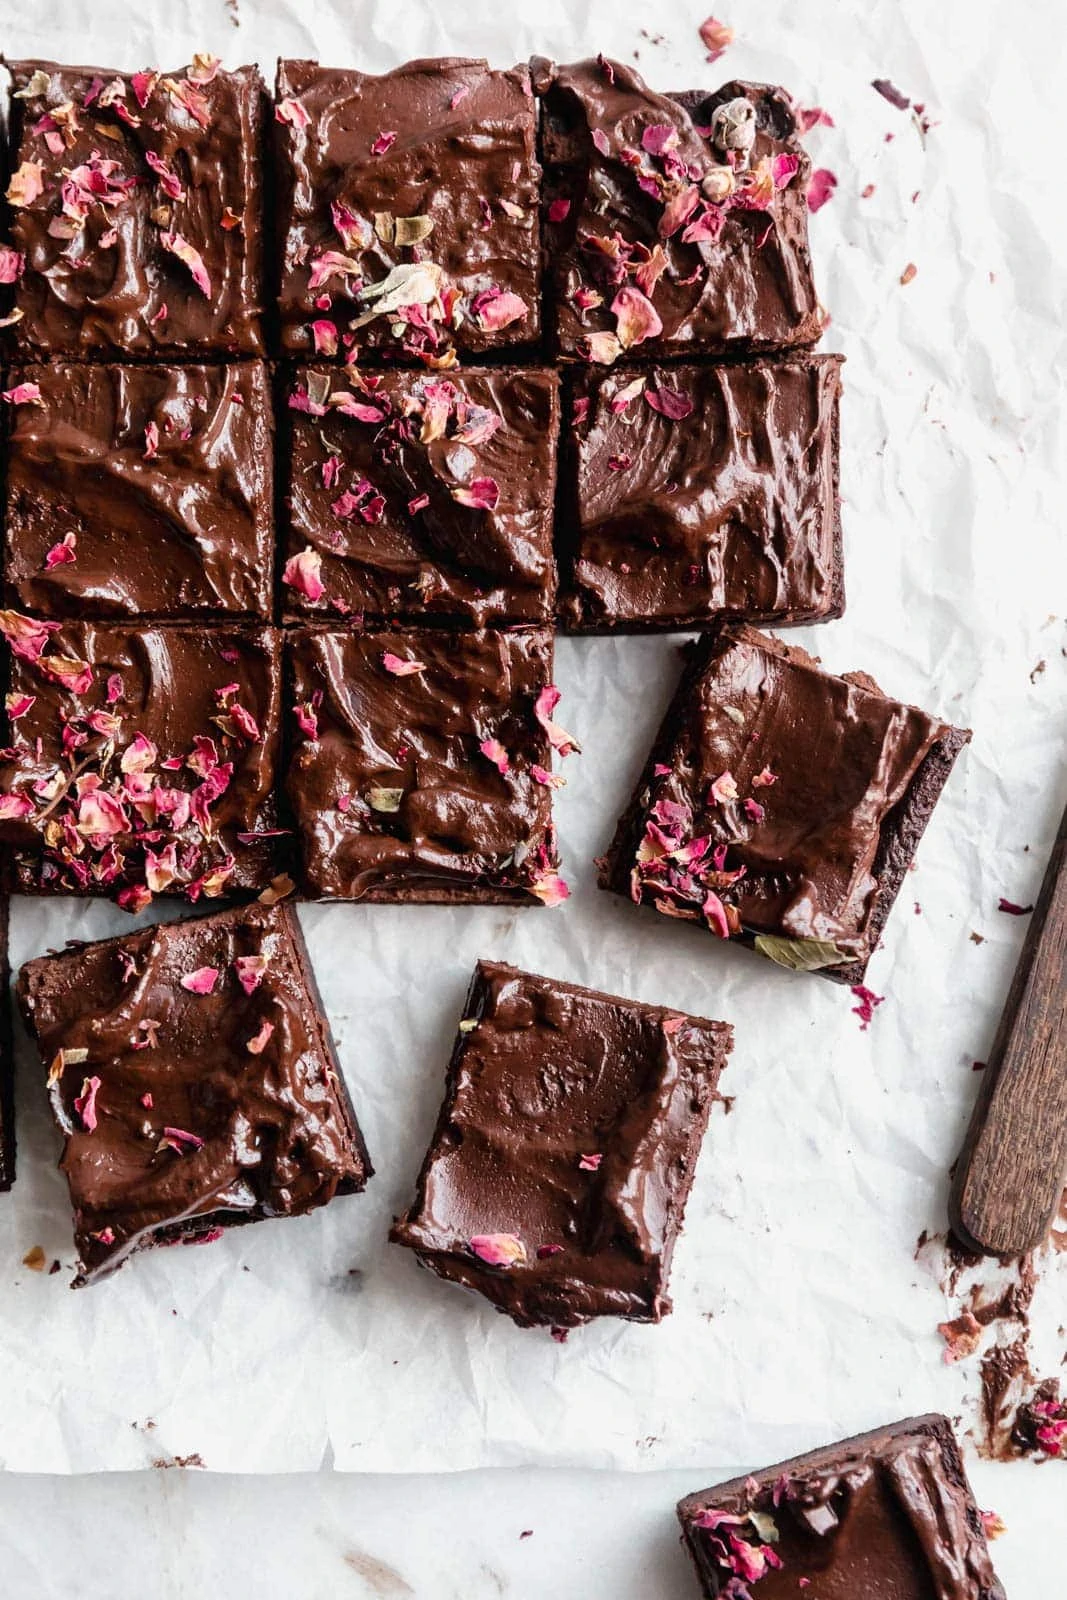 The most epic Raw Vegan Fudge Brownies that have this non-vegan questioning EVERYTHING. Bonus: they're gluten free and refined sugar free, too!